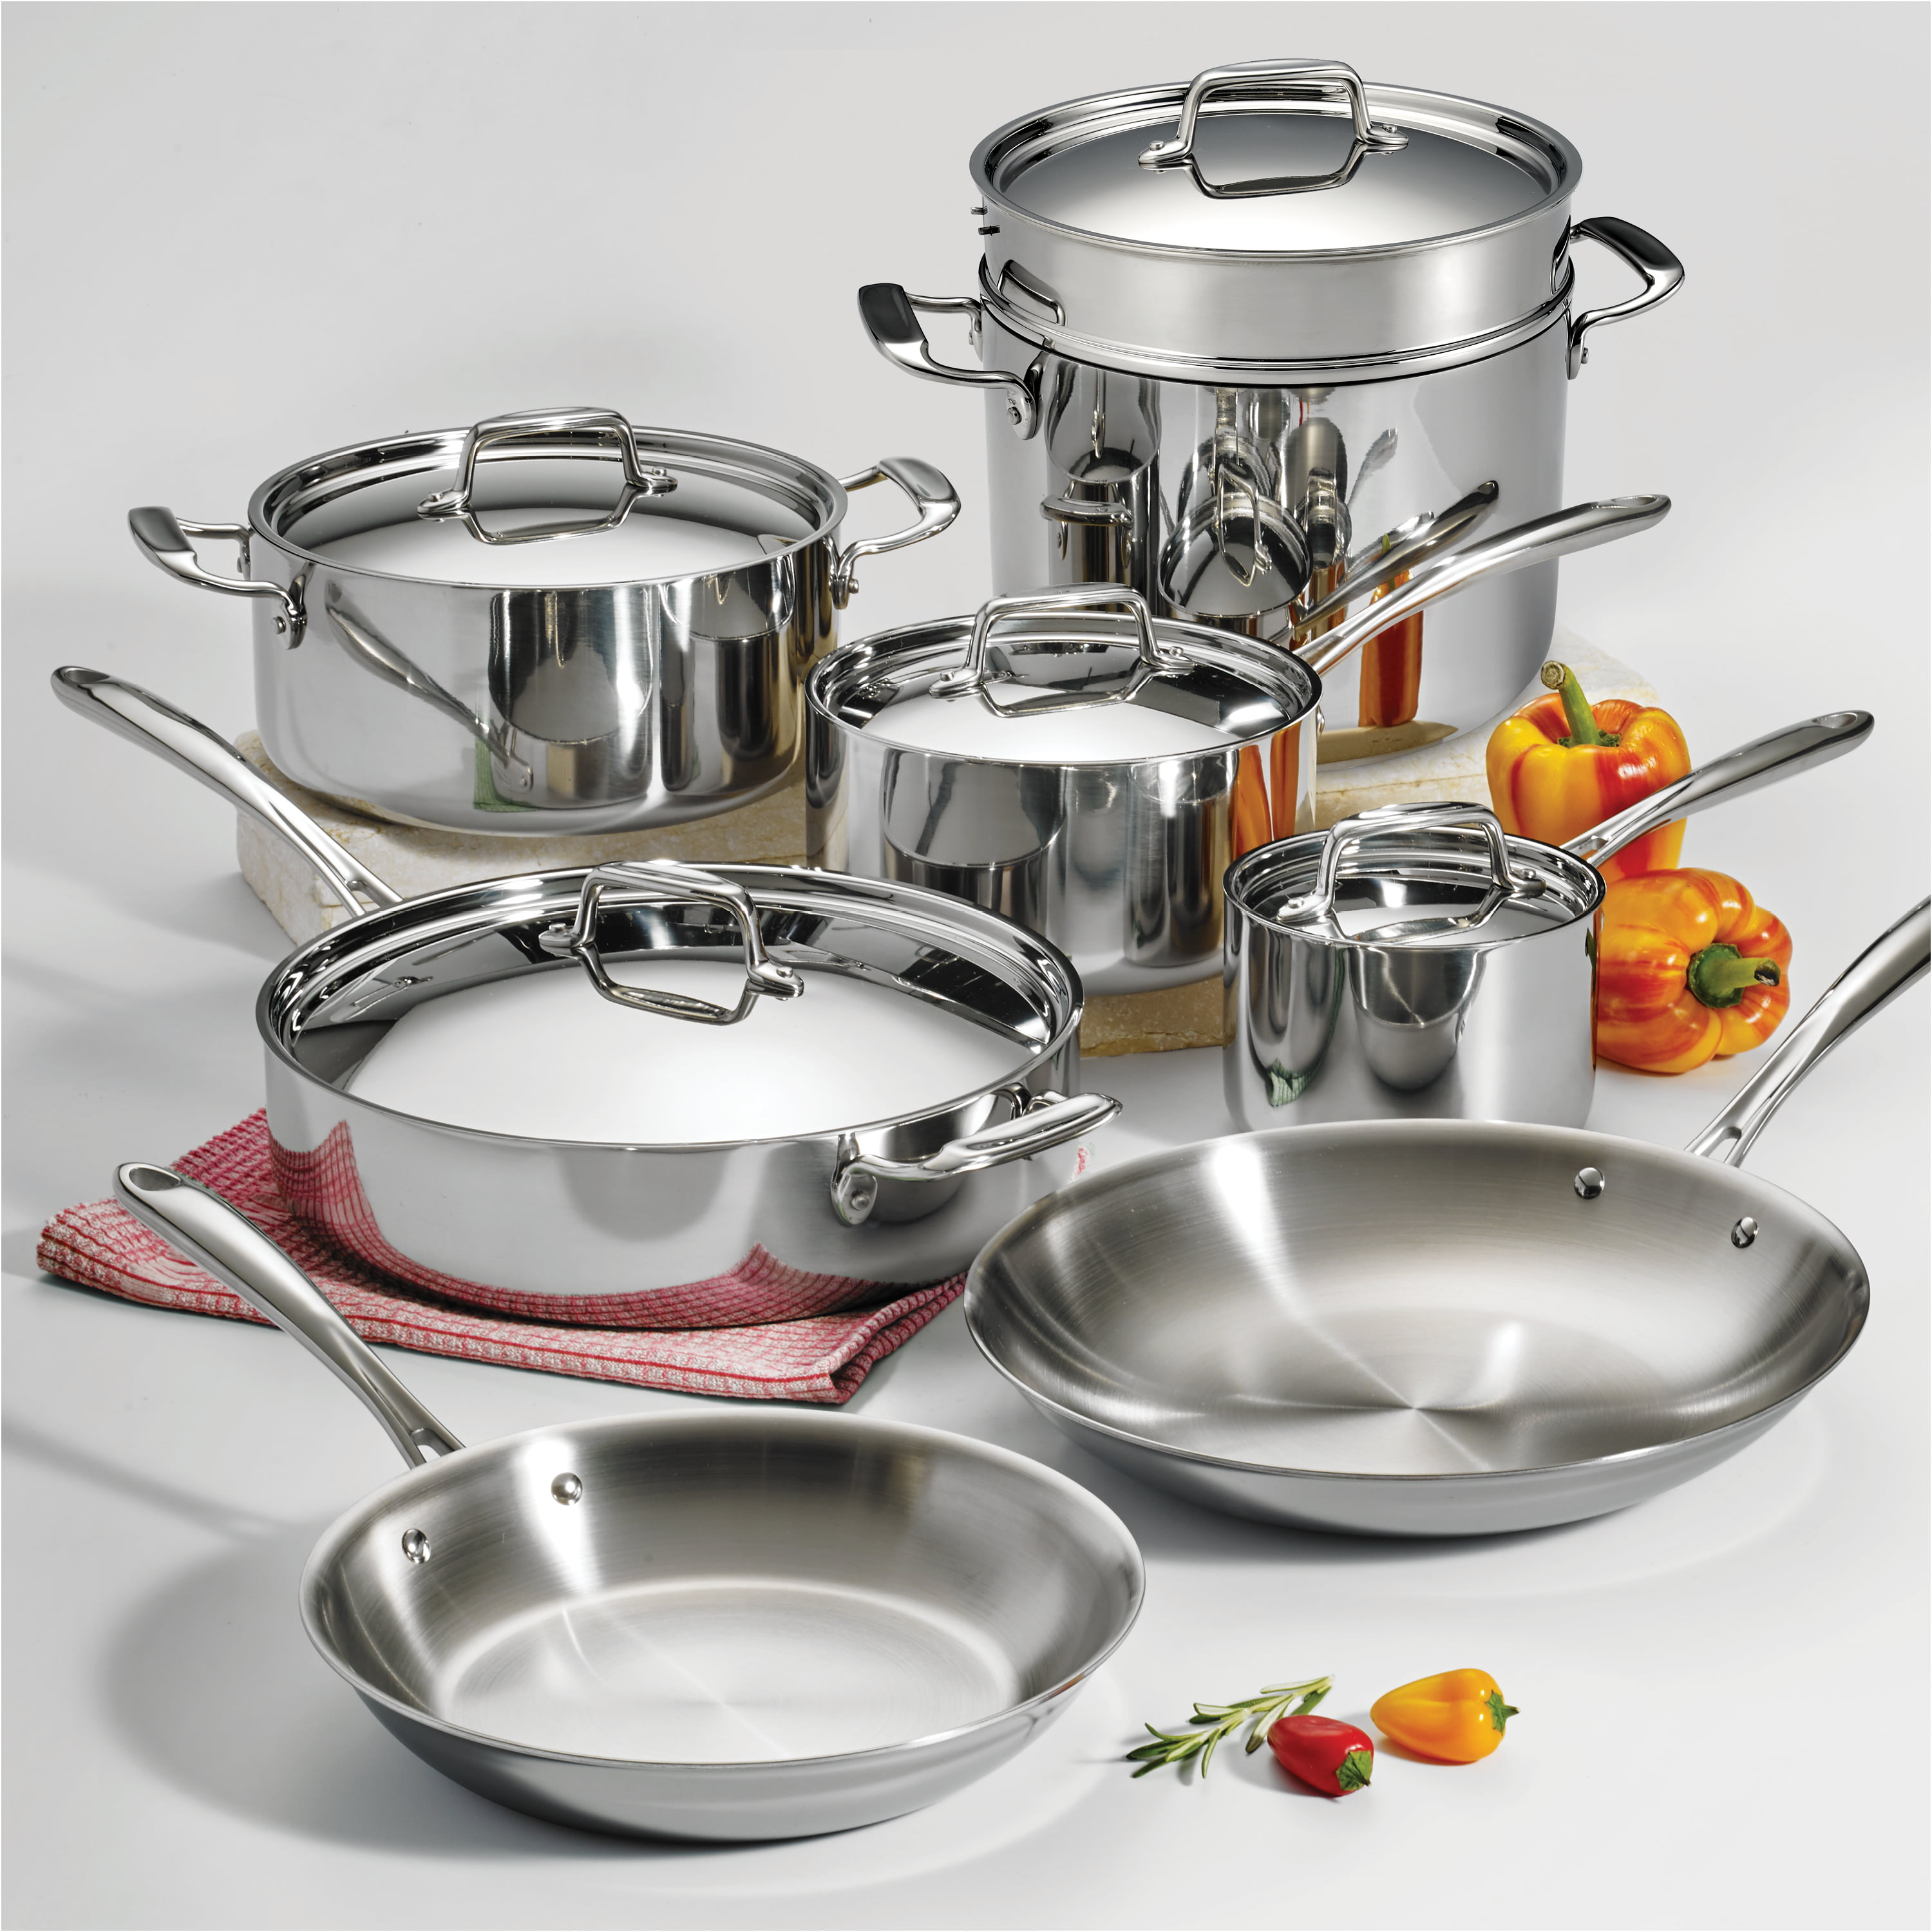 Costco Members: 12-Piece All-Clad D3 18/10 3-Ply Stainless Steel Cookware  Set